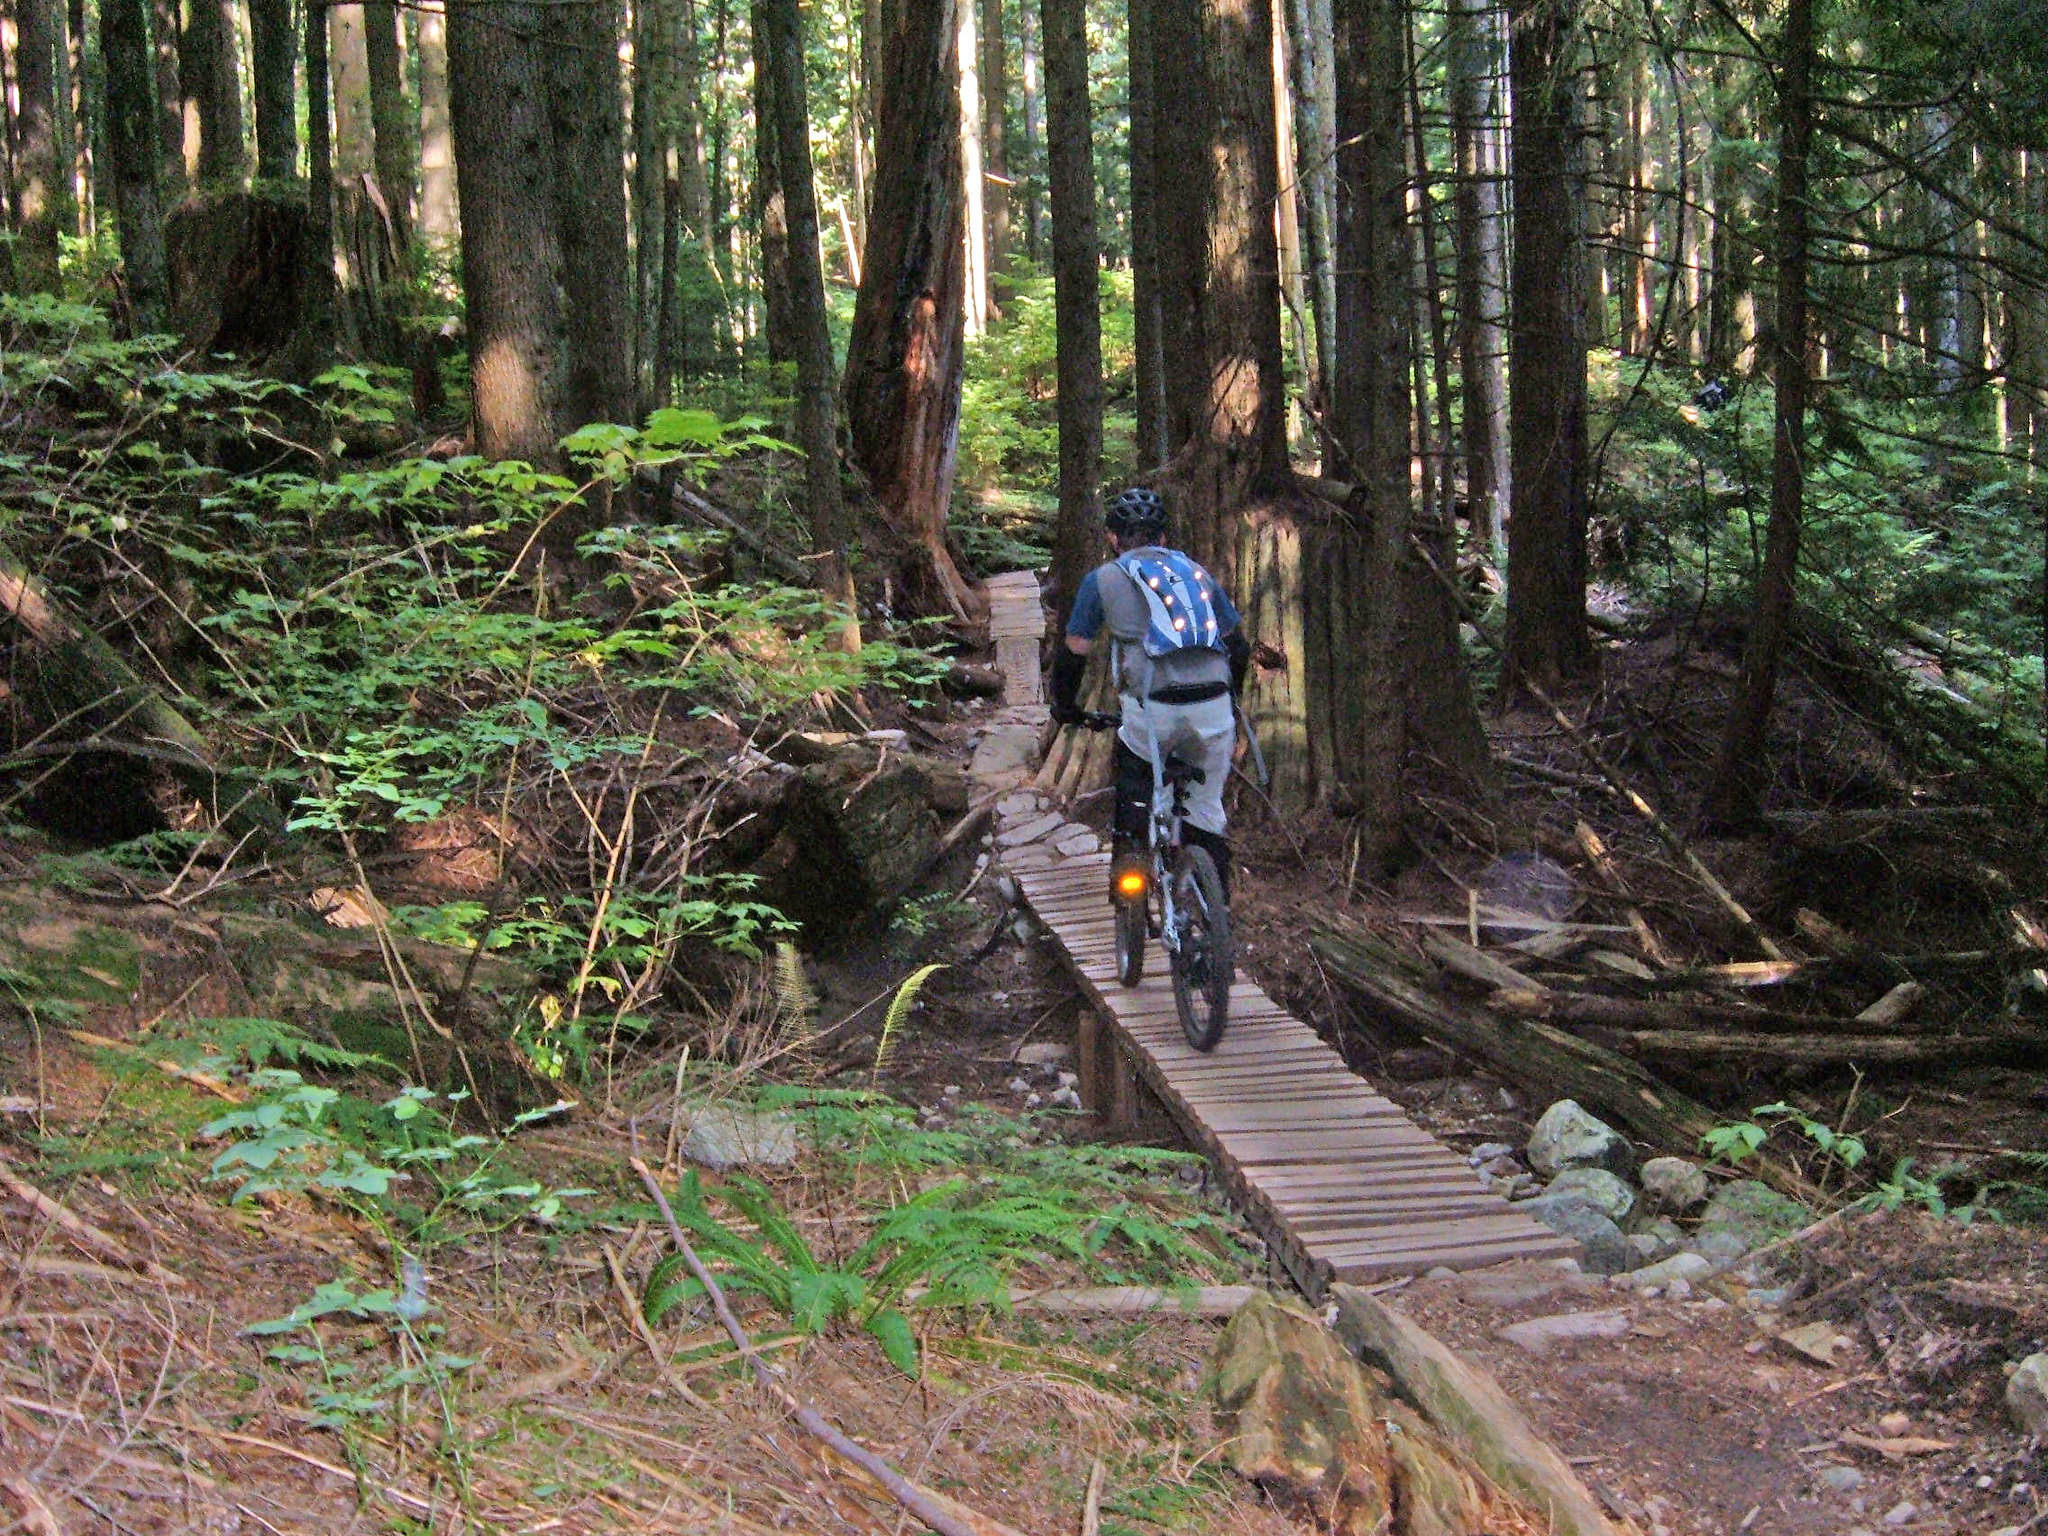 <p>Mt. Fromme, part of the North Shore mountain biking scene in British Columbia, is renowned for its technical trails and challenging terrain. The area features over 30 miles of trails, including the famous “Fromme Classics” like Ladies Only and Bobsled. Riders can expect steep descents, rocky sections, and intricate wooden features, all set in a lush, temperate rainforest. Nearby Vancouver offers a bustling urban experience with a variety of dining, shopping, and cultural attractions.</p>